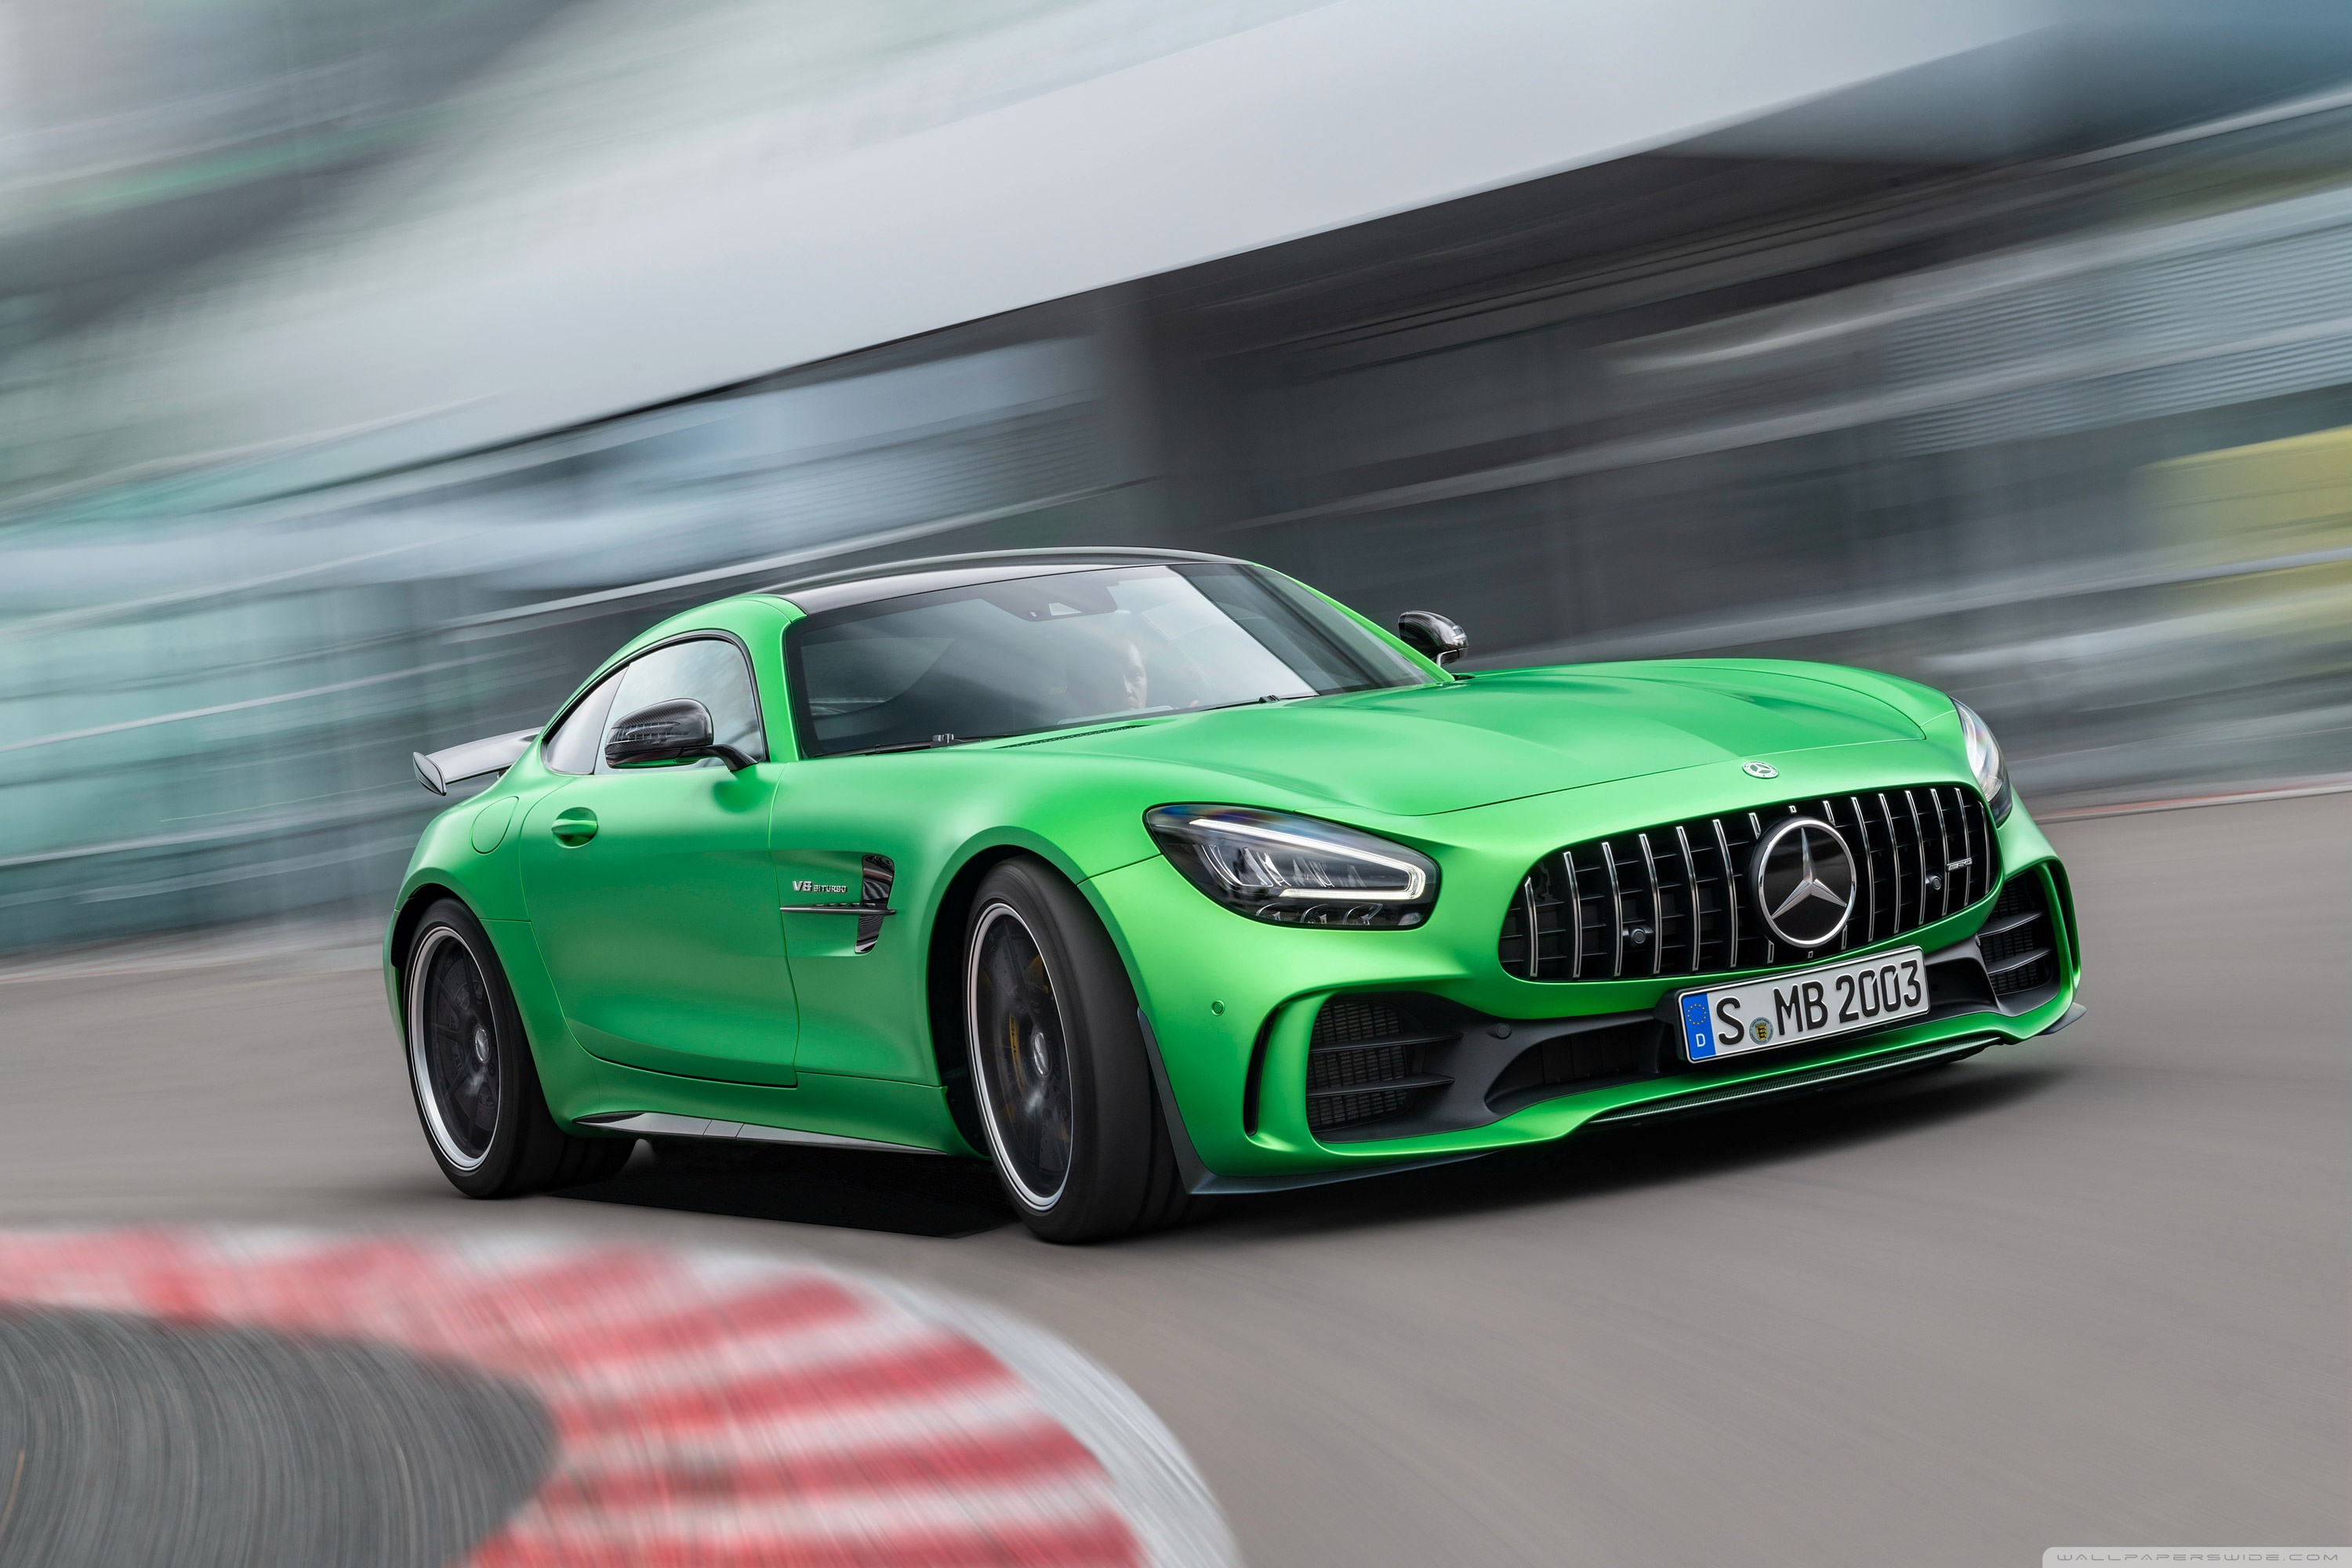 Amg Gtr Pictures  Download Free Images on Unsplash